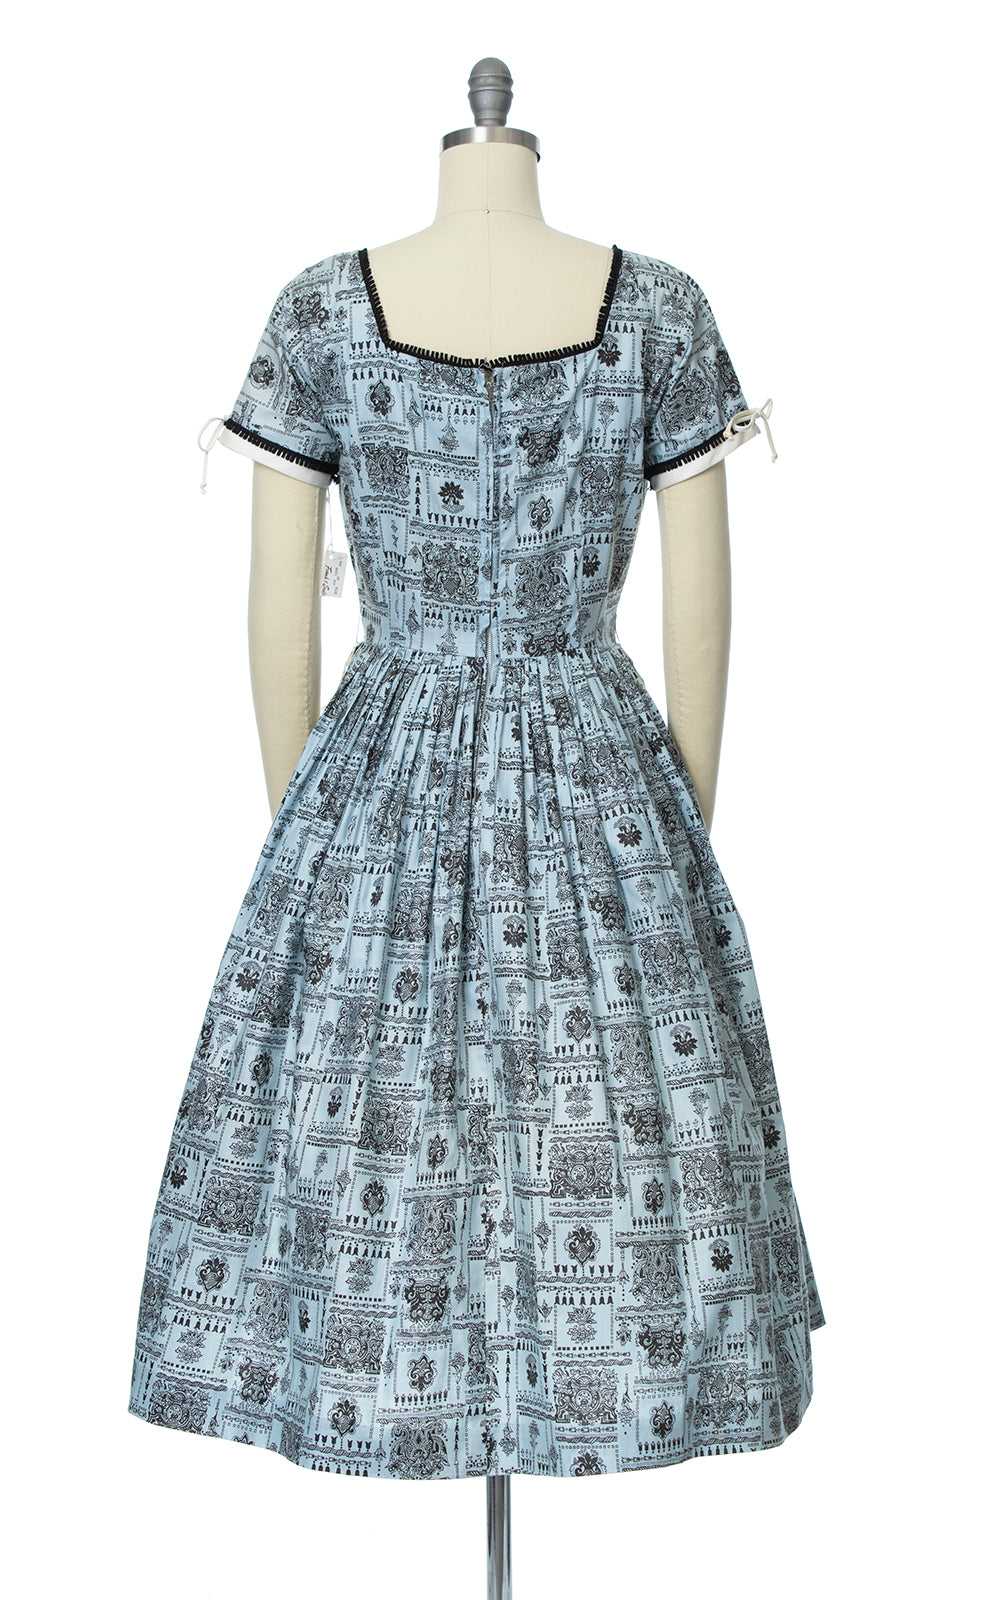 DEADSTOCK 1950s Printed Cotton Dress | small - image 4